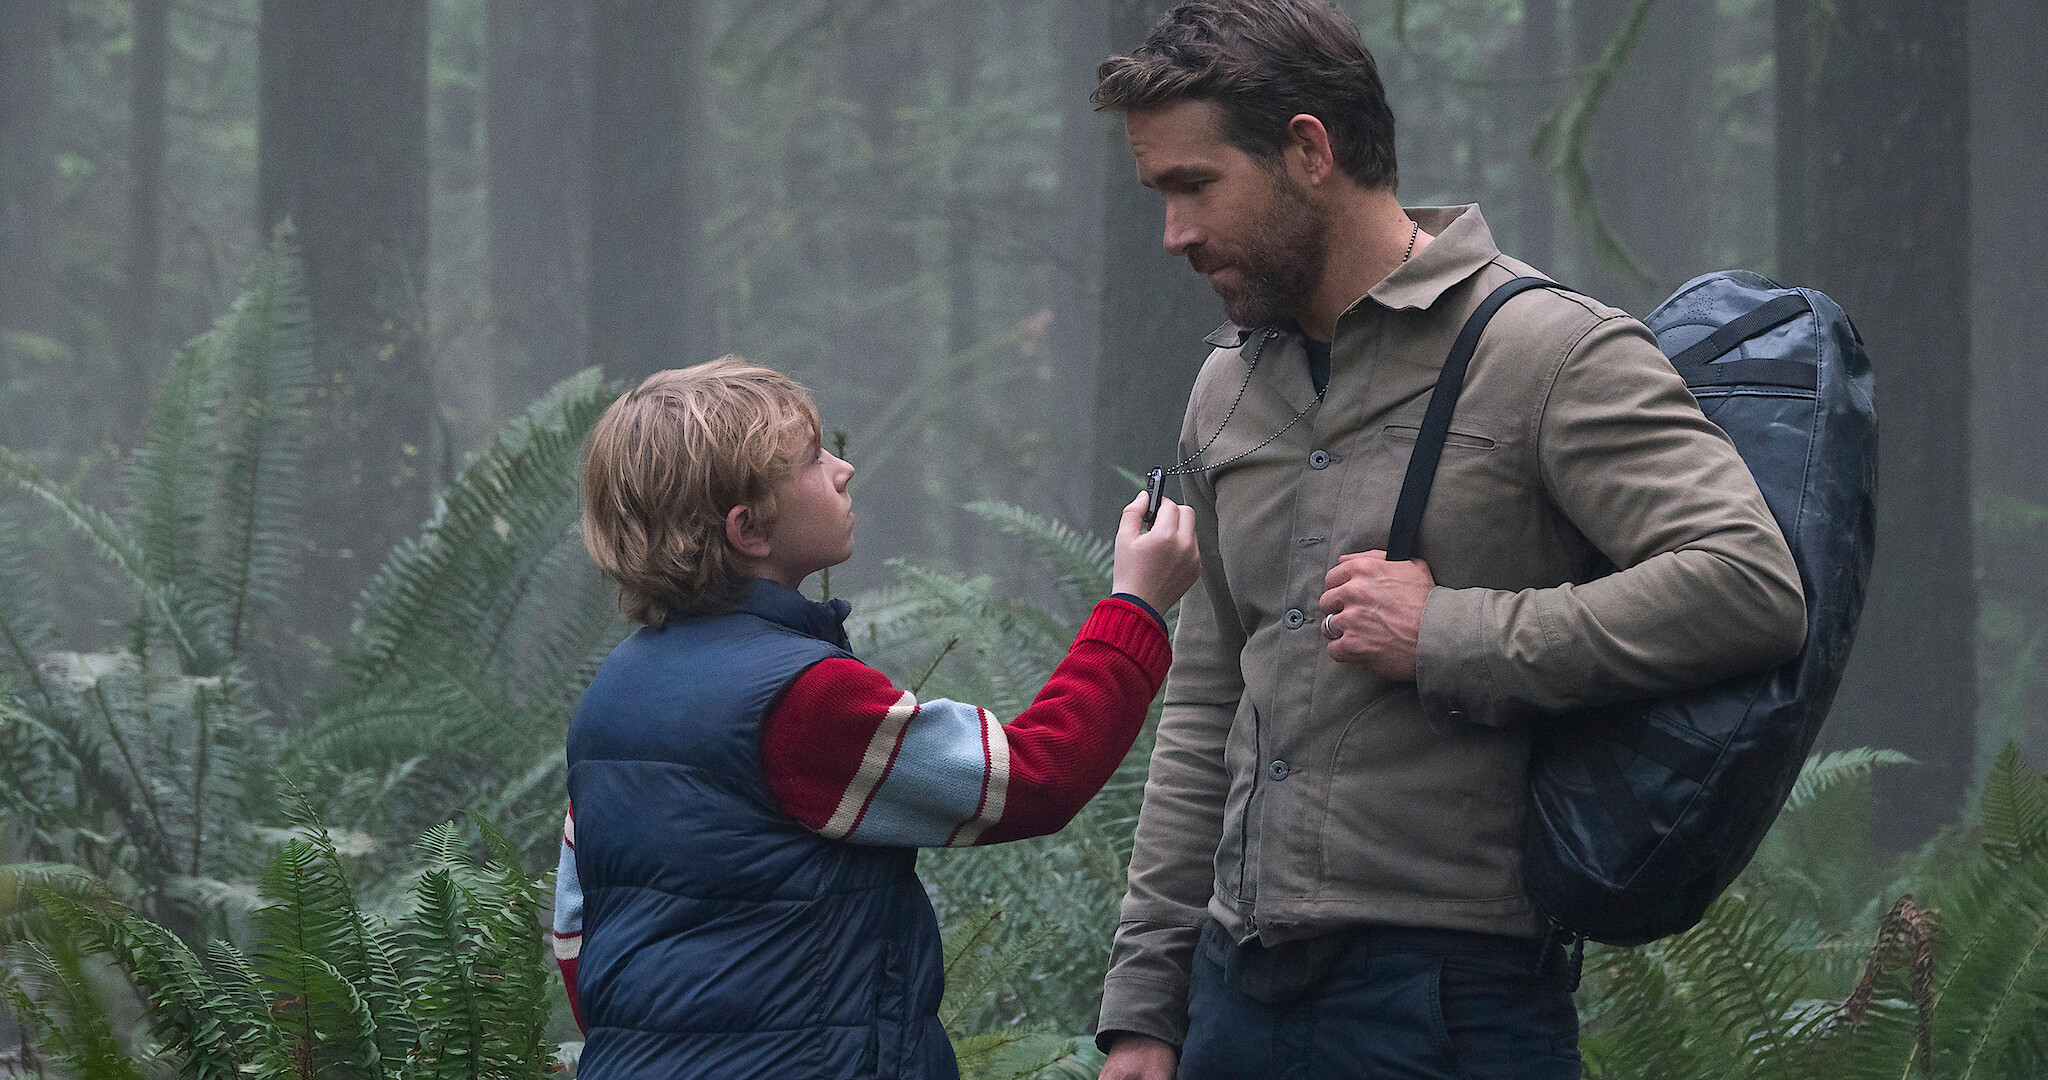 Walker Scobell and Ryan Reynolds in a scene from The Adam Project